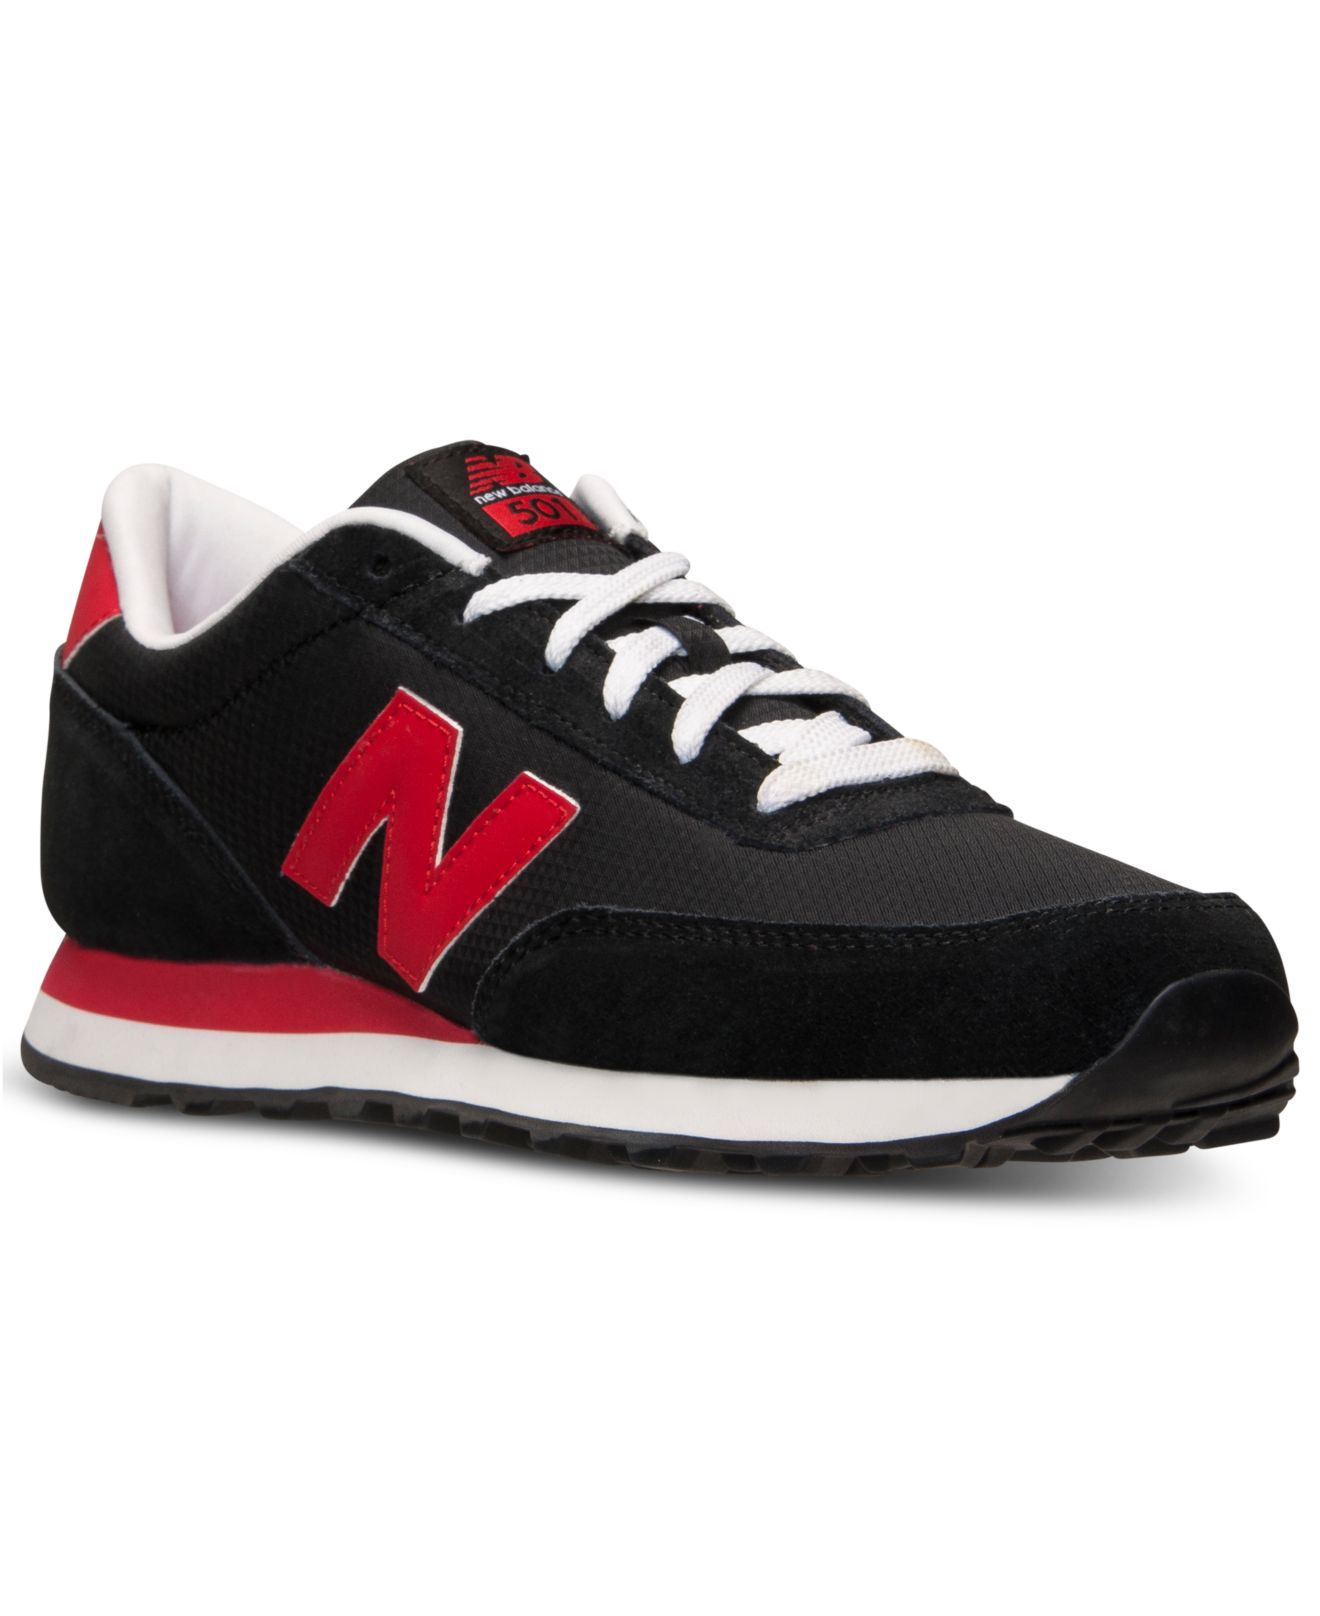 New Balance Men'S 501 Sneakers From Finish Line in Black/Red (Black ...